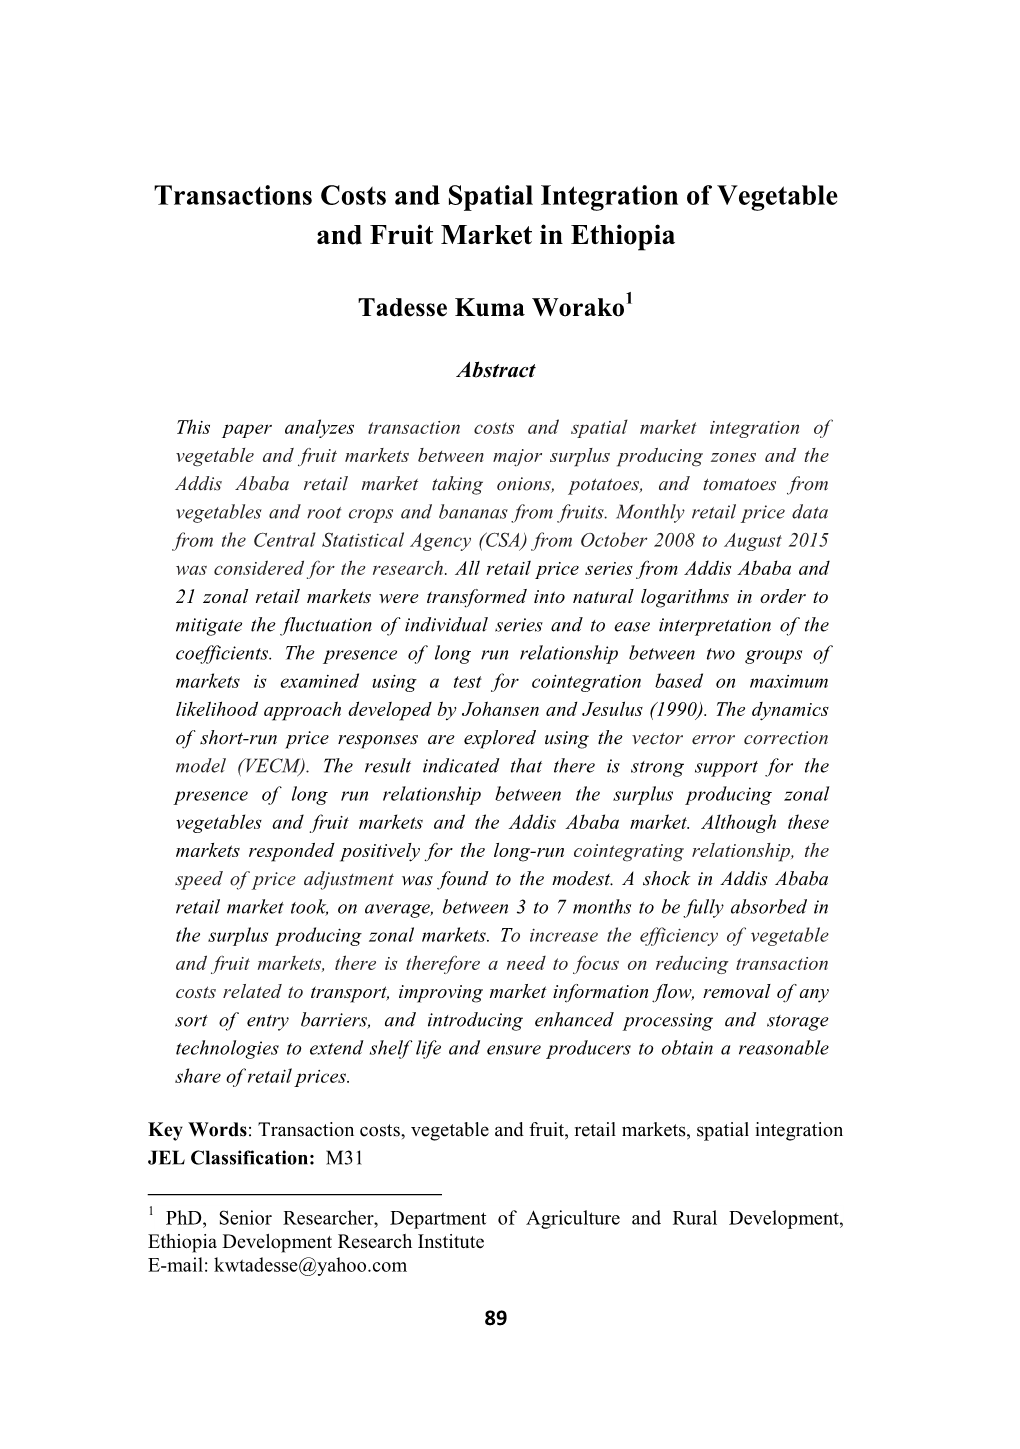 Transactions Costs and Spatial Integration of Vegetable and Fruit Market in Ethiopia